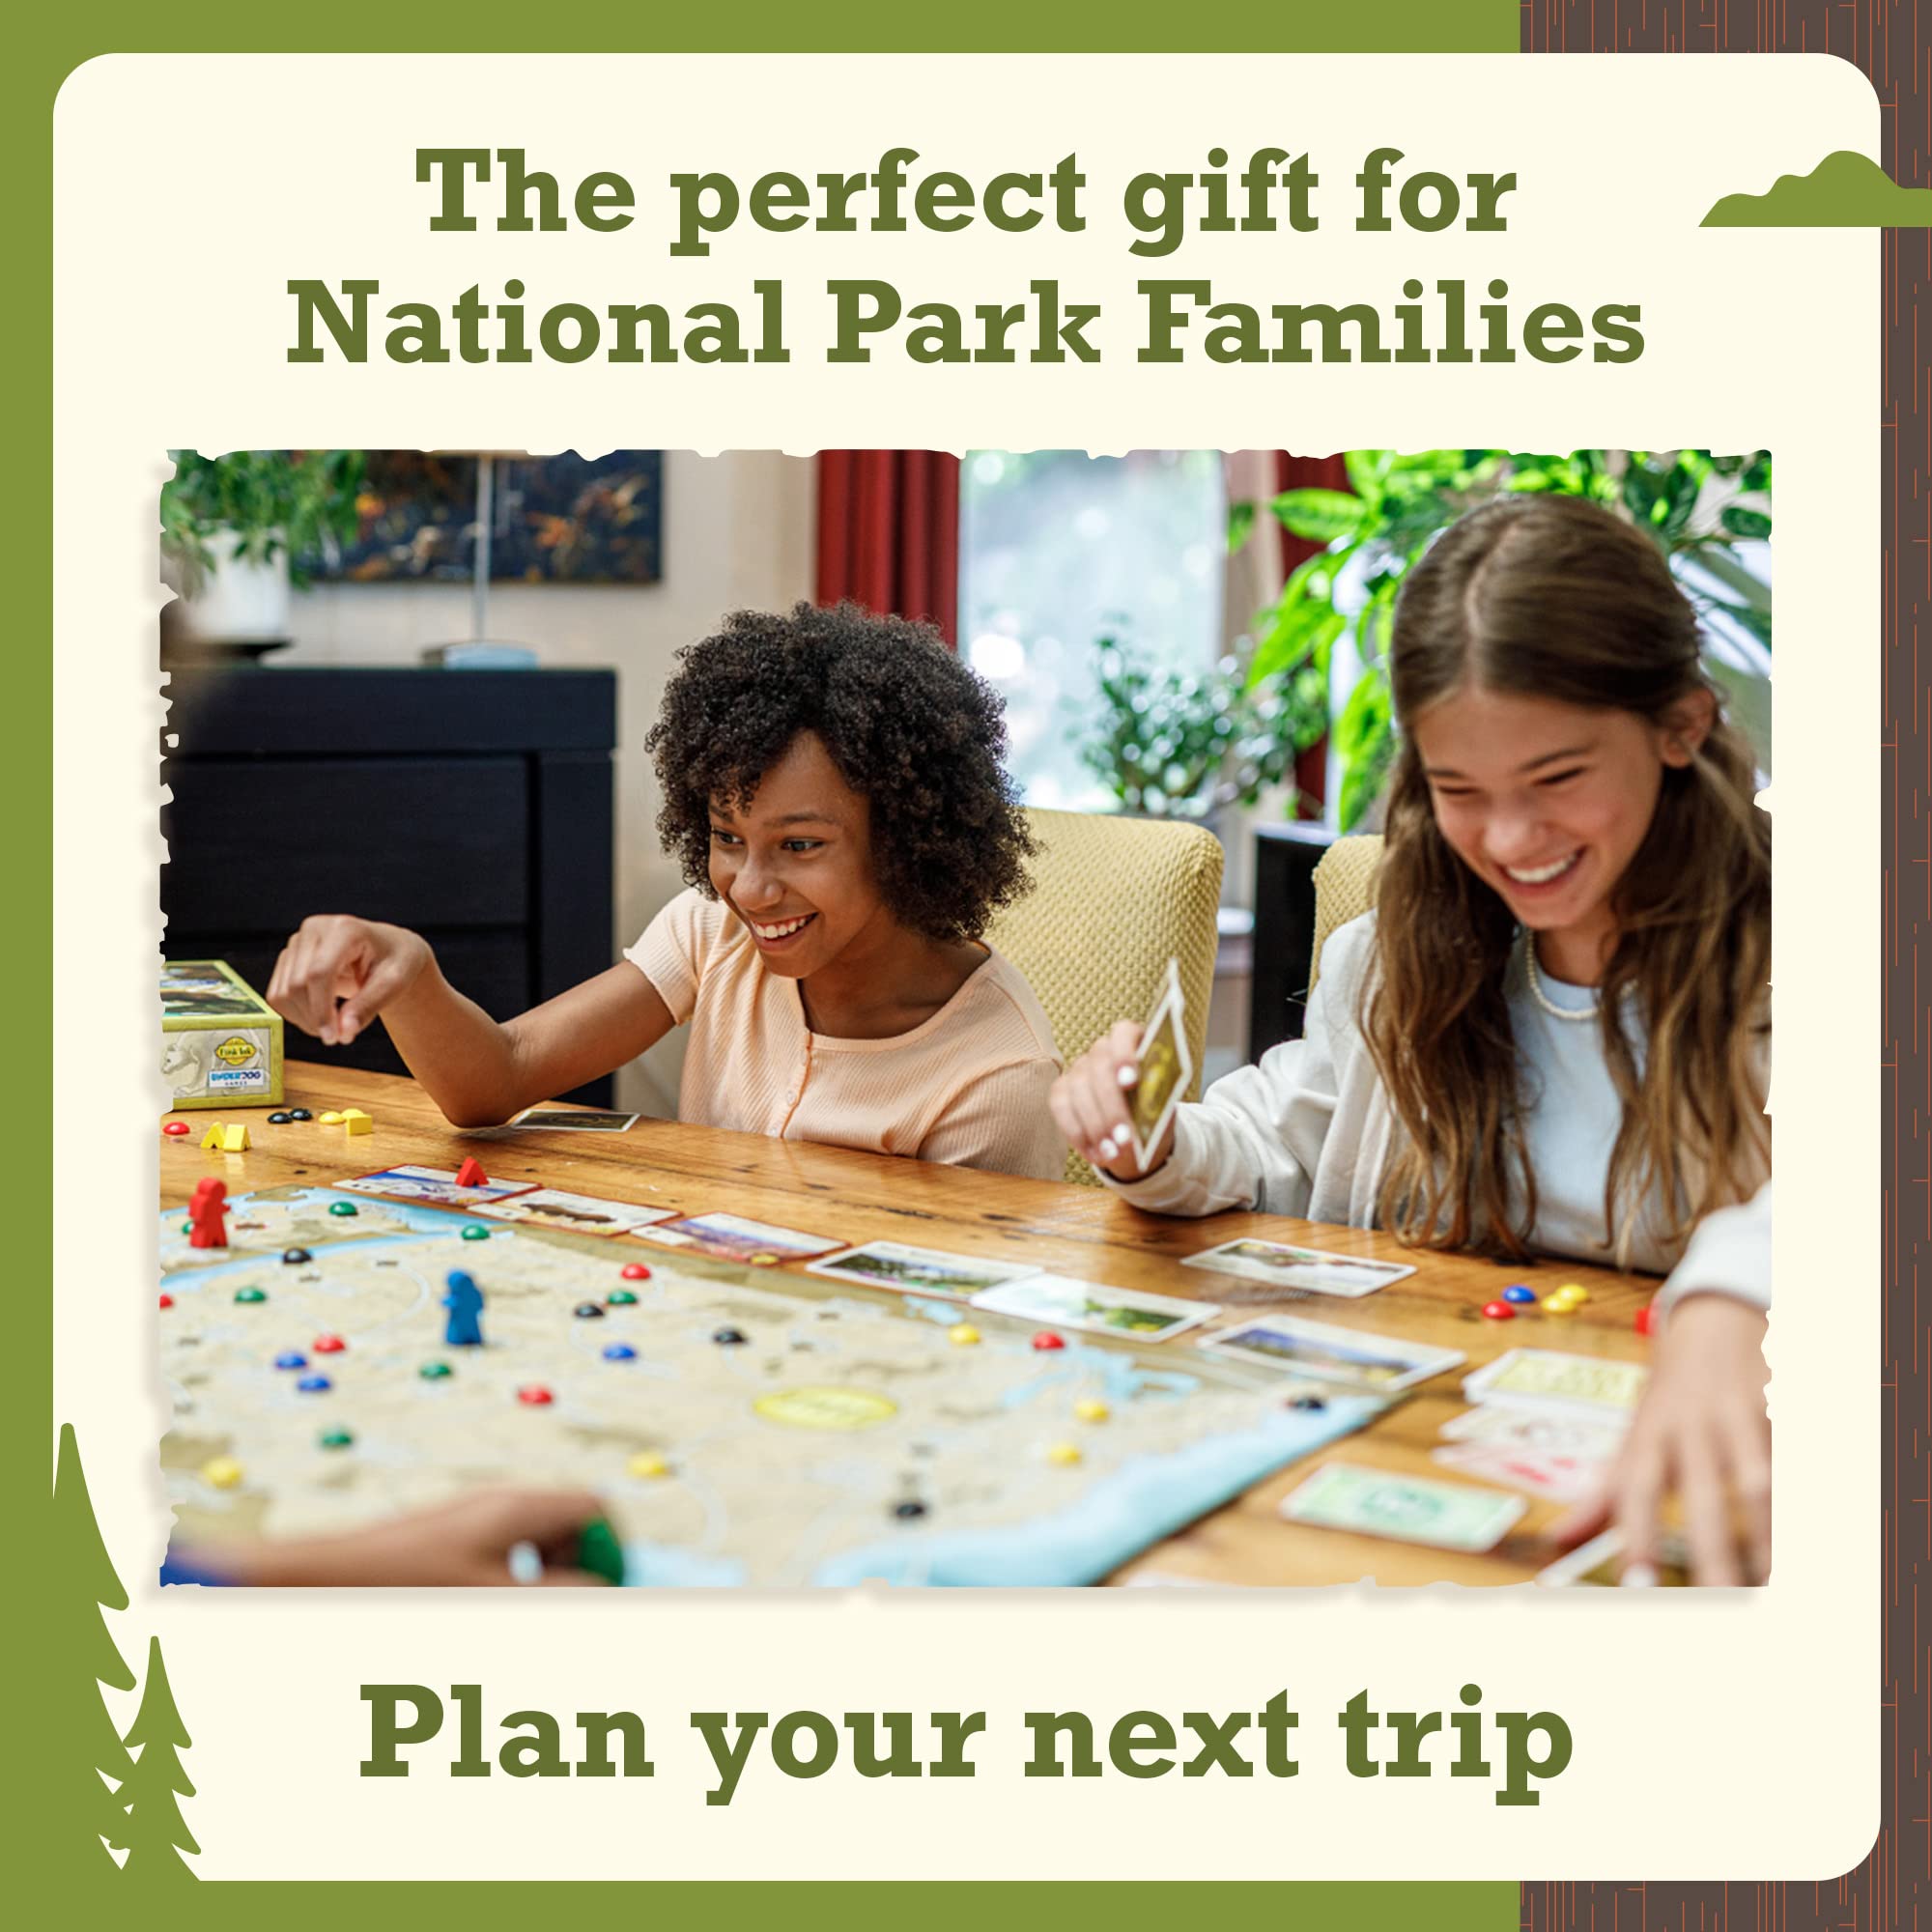 Trekking The National Parks - The Award-Winning Strategy Board Game for Family Night | The Perfect Board Game for National Park Lovers, Kids & Adults | Ages 10 and Up | Easy to Learn